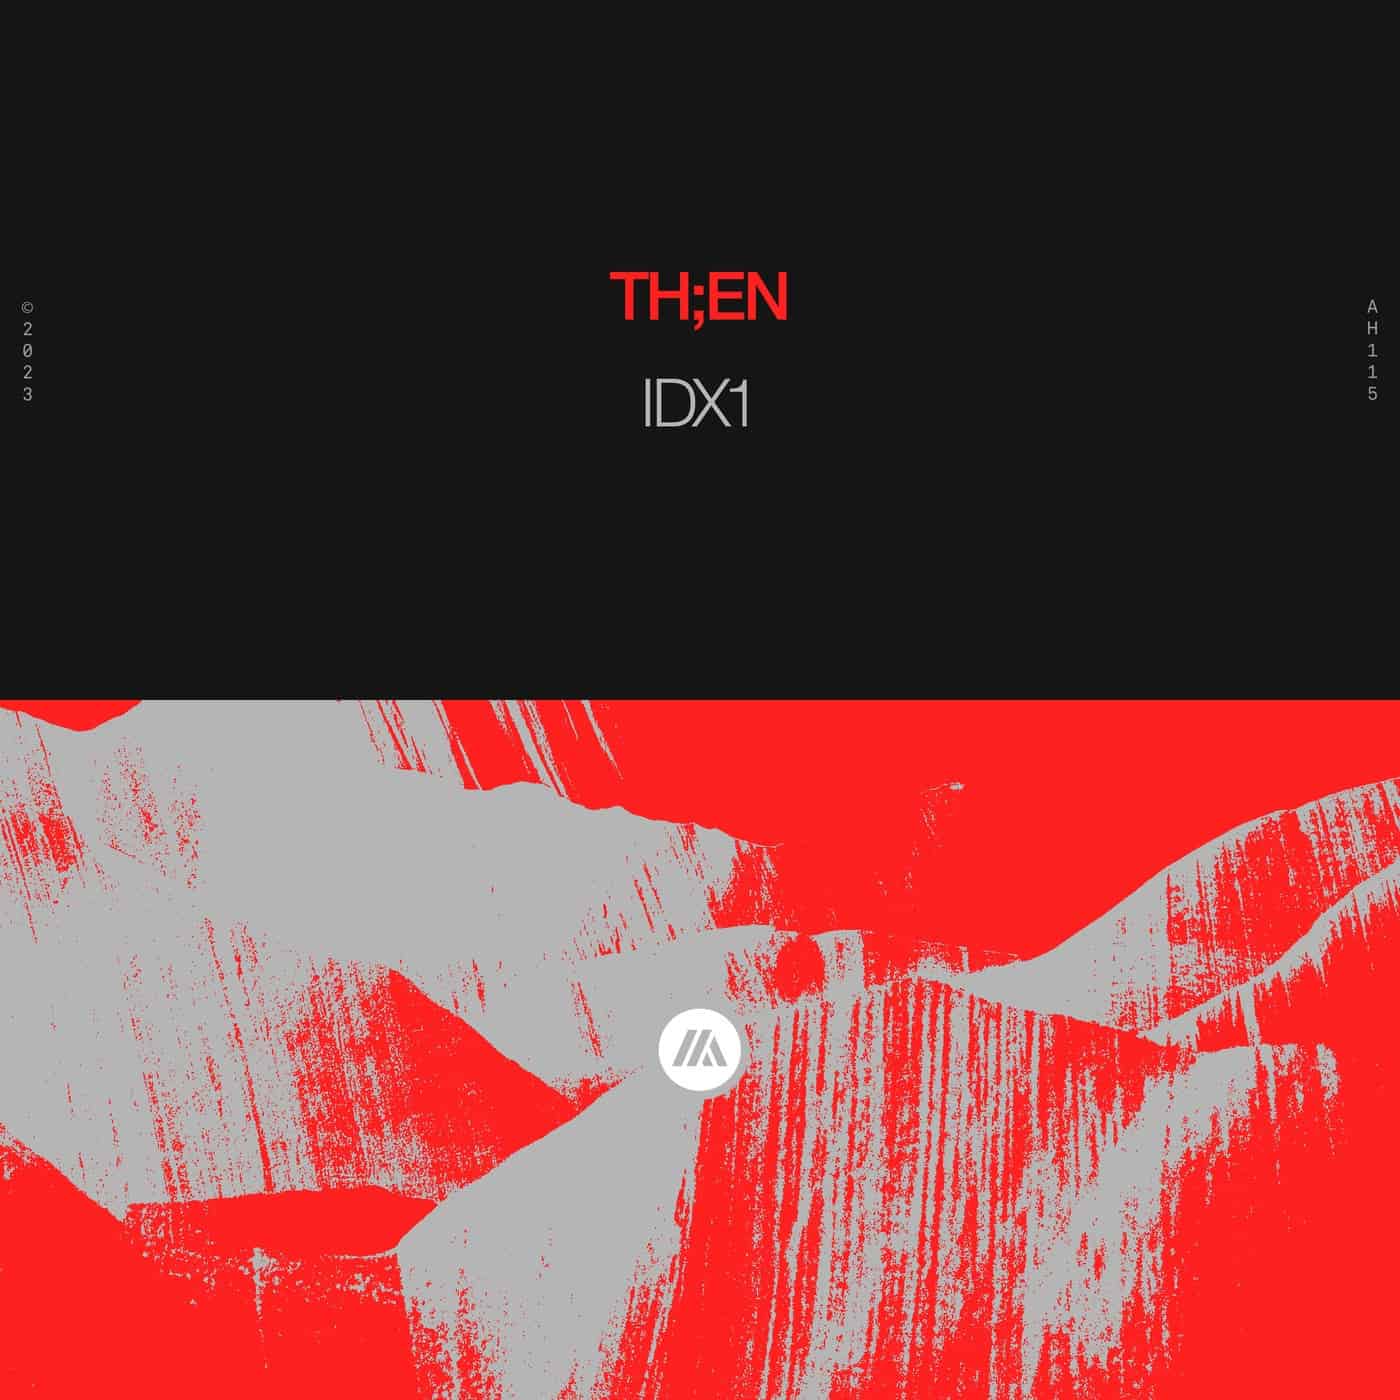 image cover: IDX1 (Extended Mix) by Th;en on AFTR:HRS